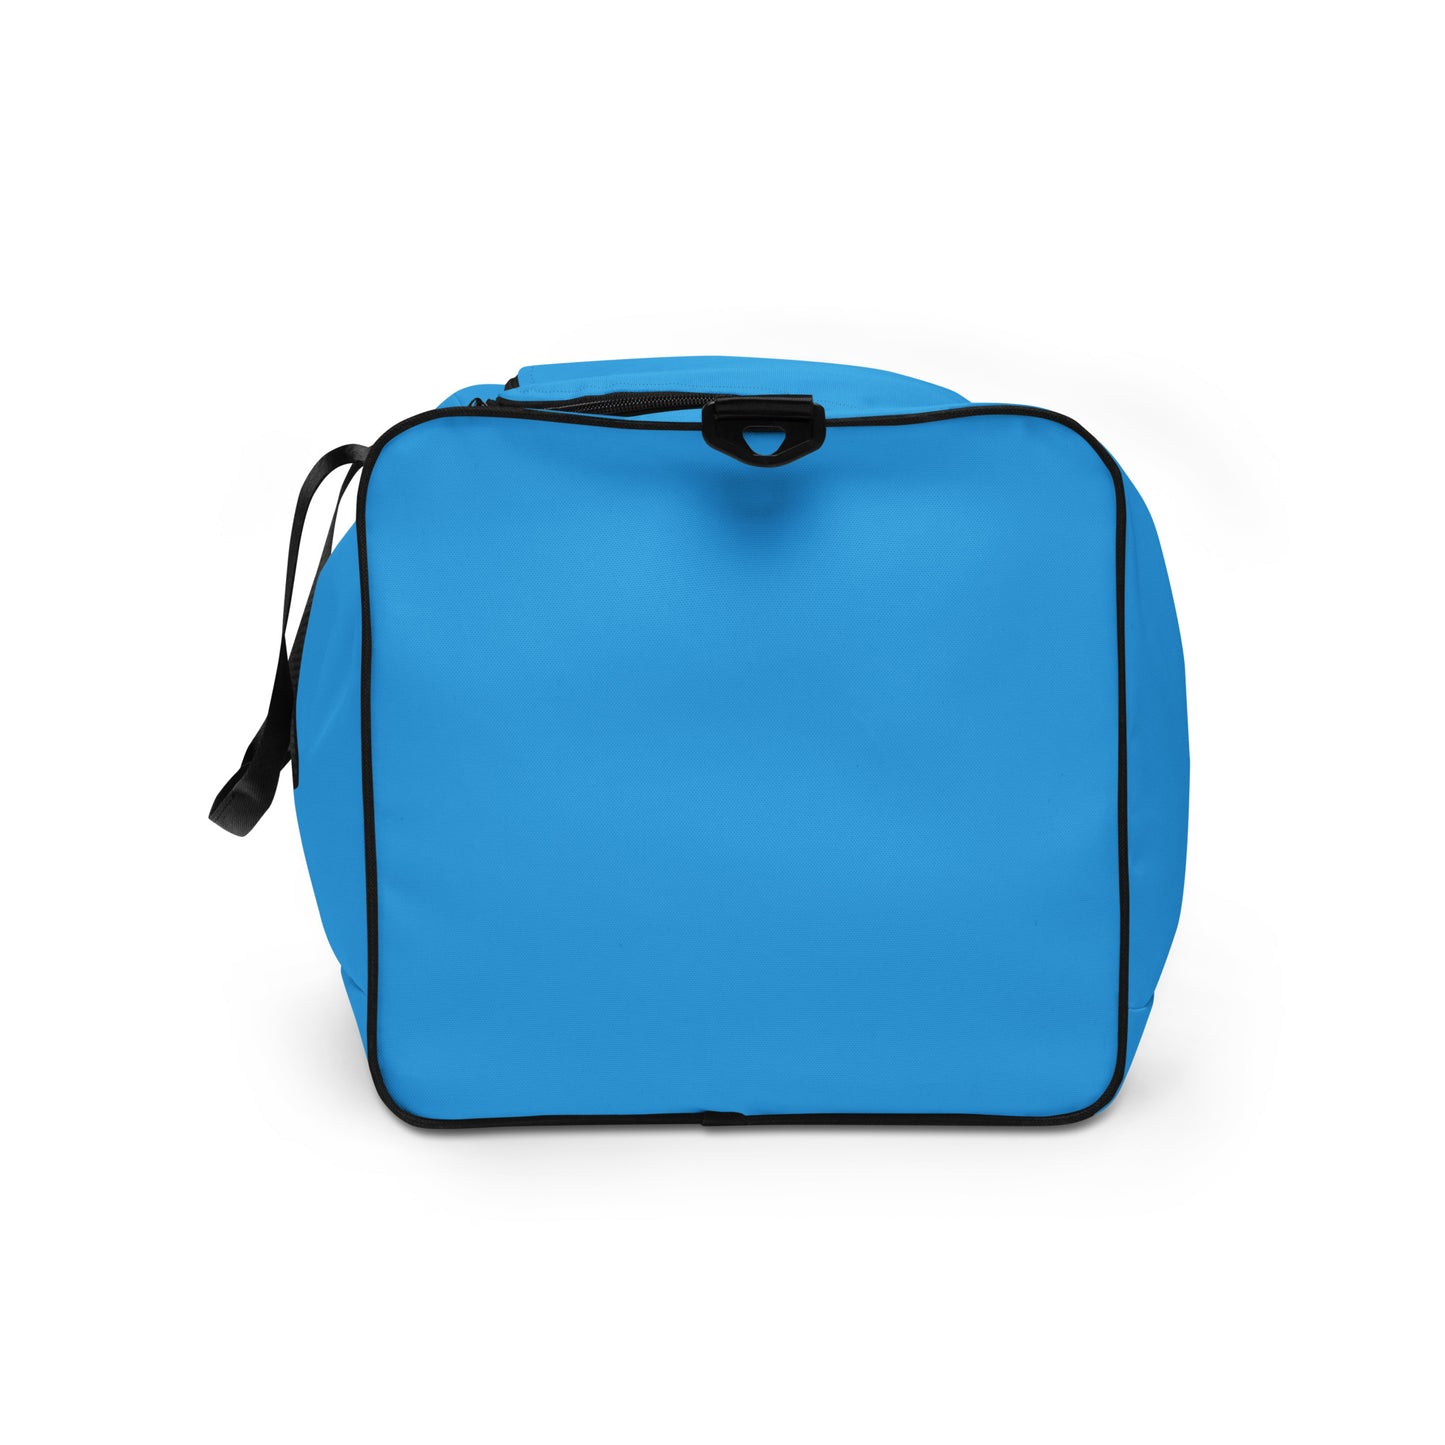 Badlands Extra Large Duffle Bag in electric blue